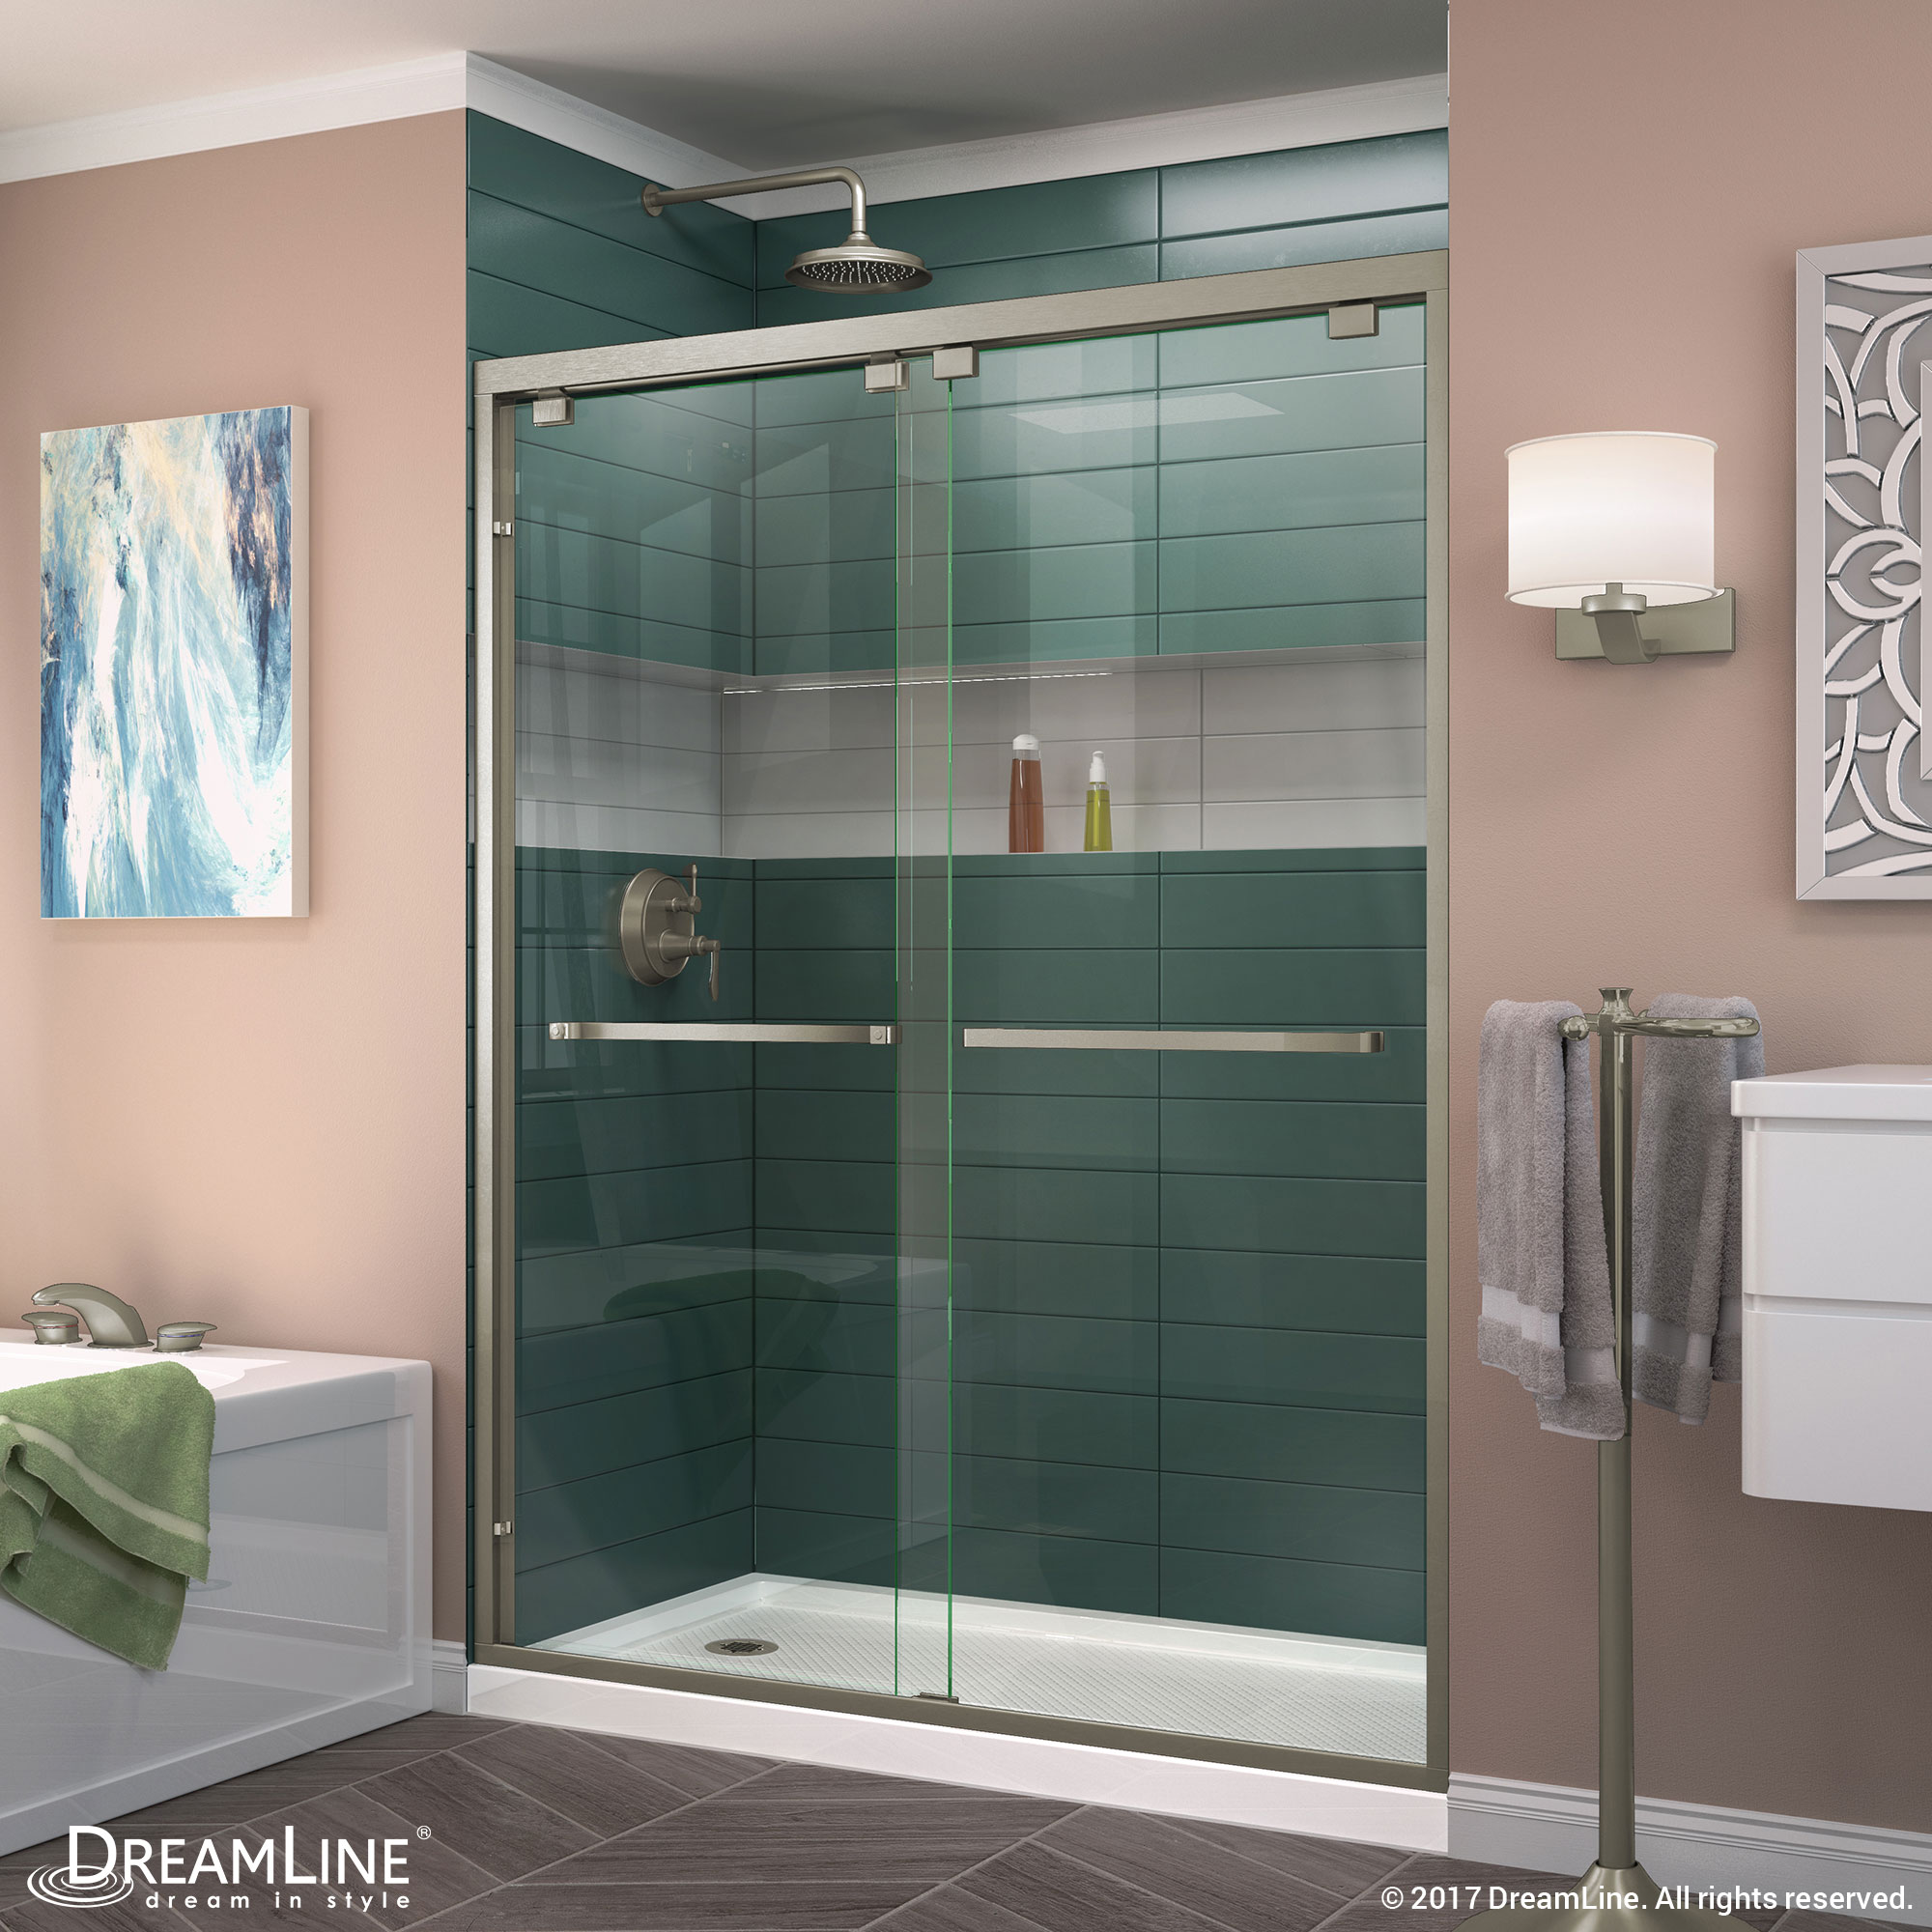 DreamLine Encore 36 in. D x 60 in. W x 78 3/4 in. H Bypass Shower Door in Chrome and Left Drain White Base Kit